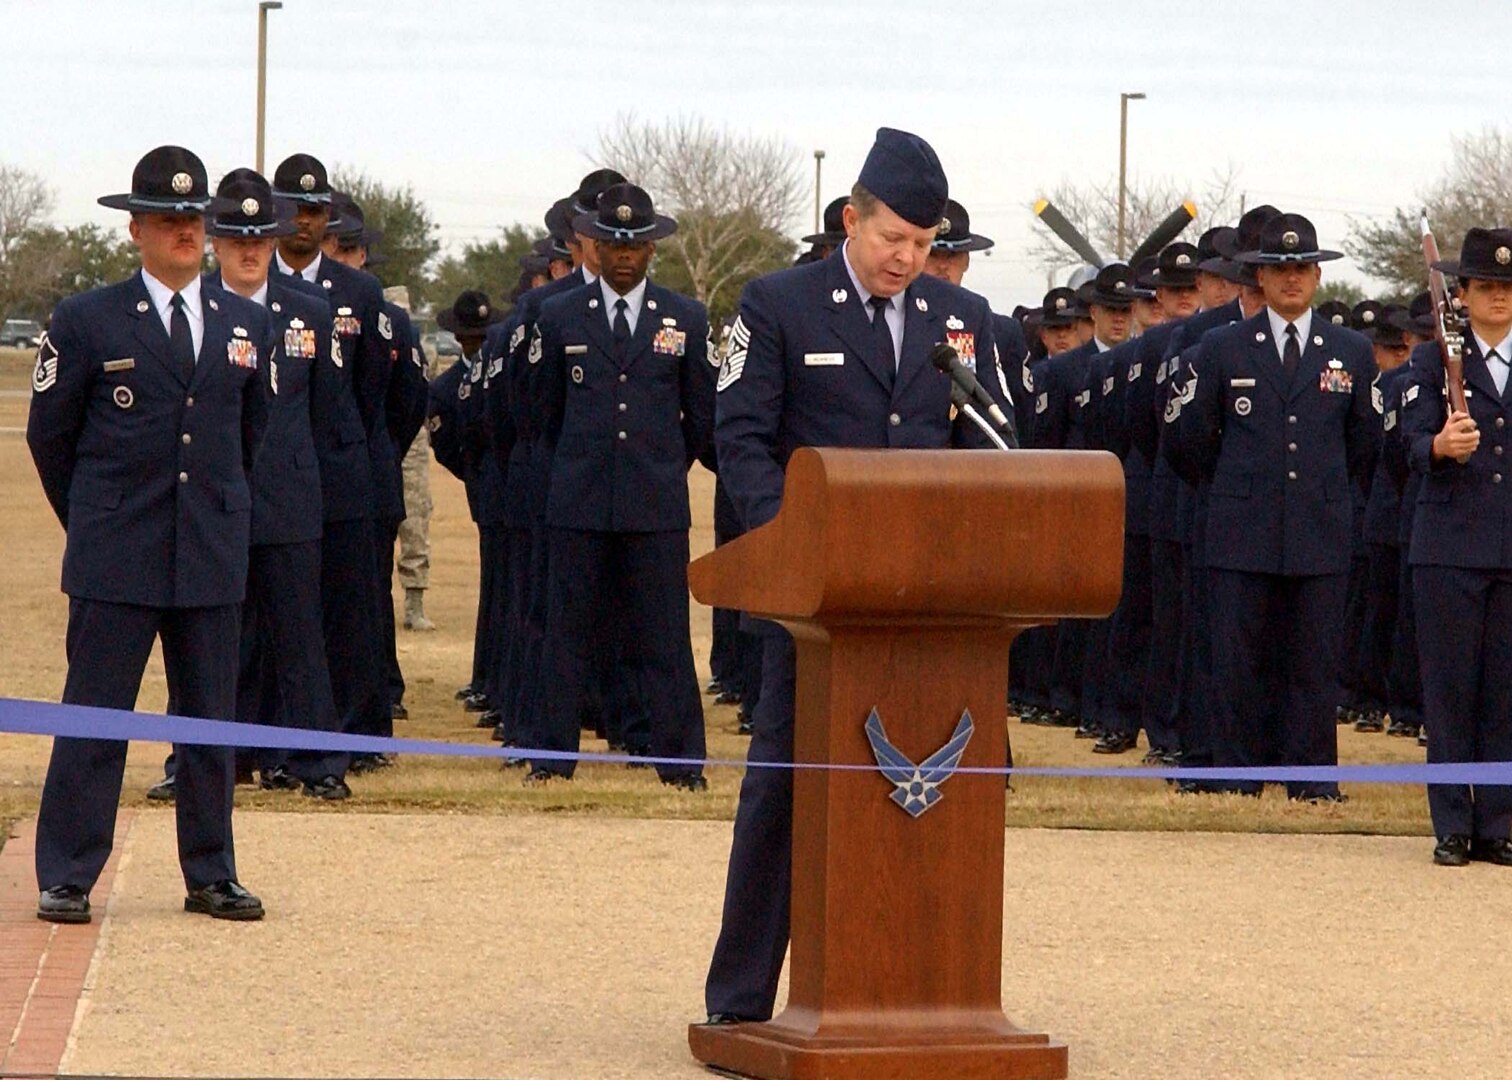 Chief Master Sergeant of the Air Force Rodney McKinley, addresses the audience, including more than 700 Airmen preparing to graduate from basic military training during the Jan. 2 dedication ceremony of the new Enlisted Heroes Walk at Lackland Air Force Base, Texas. (U.S. Air Force Photo/Alan Boedeker)